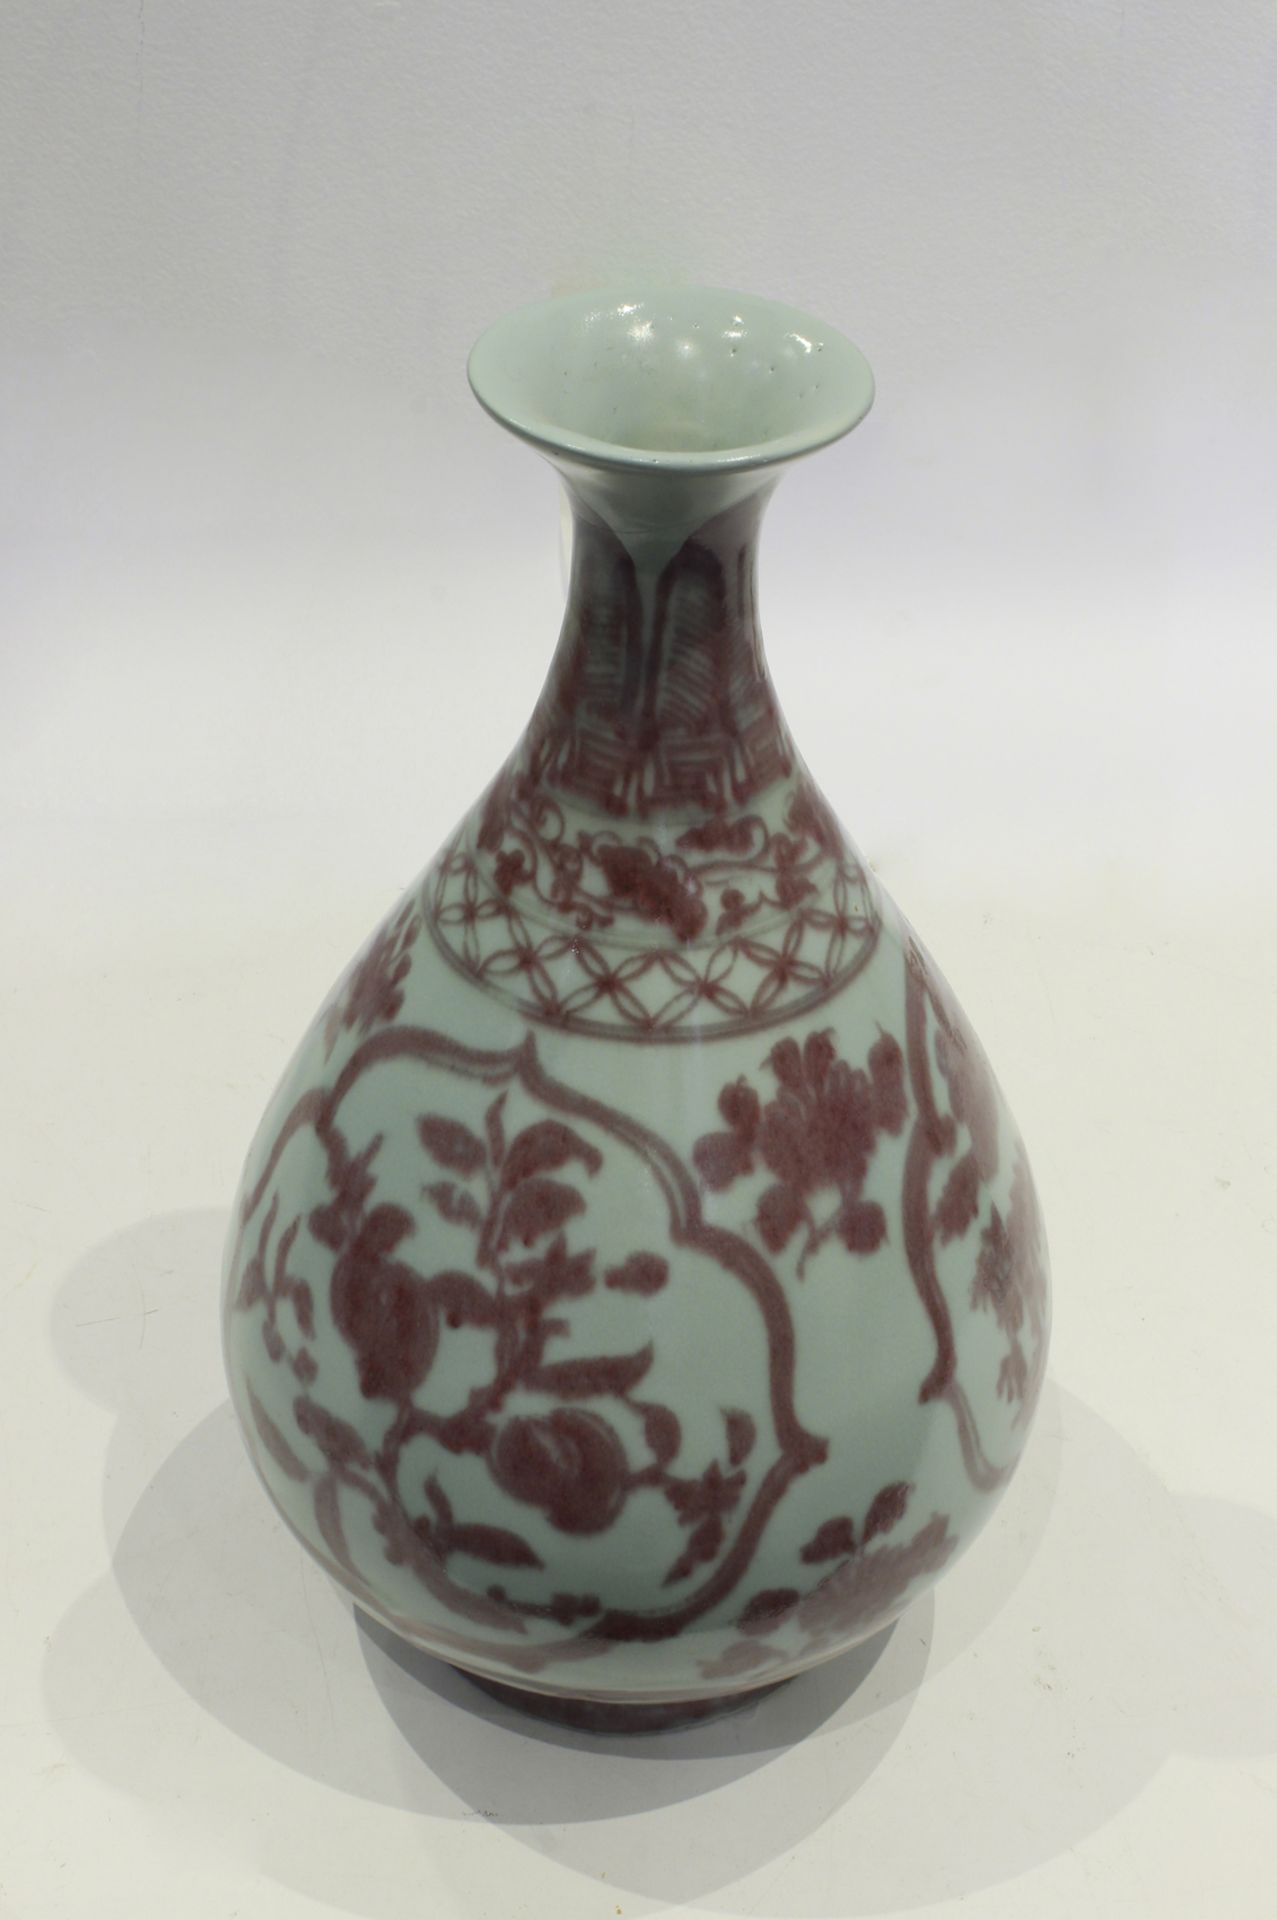 A 20th century Meiping vase in celadon porcelain with rouge de fer decoration - Image 7 of 8